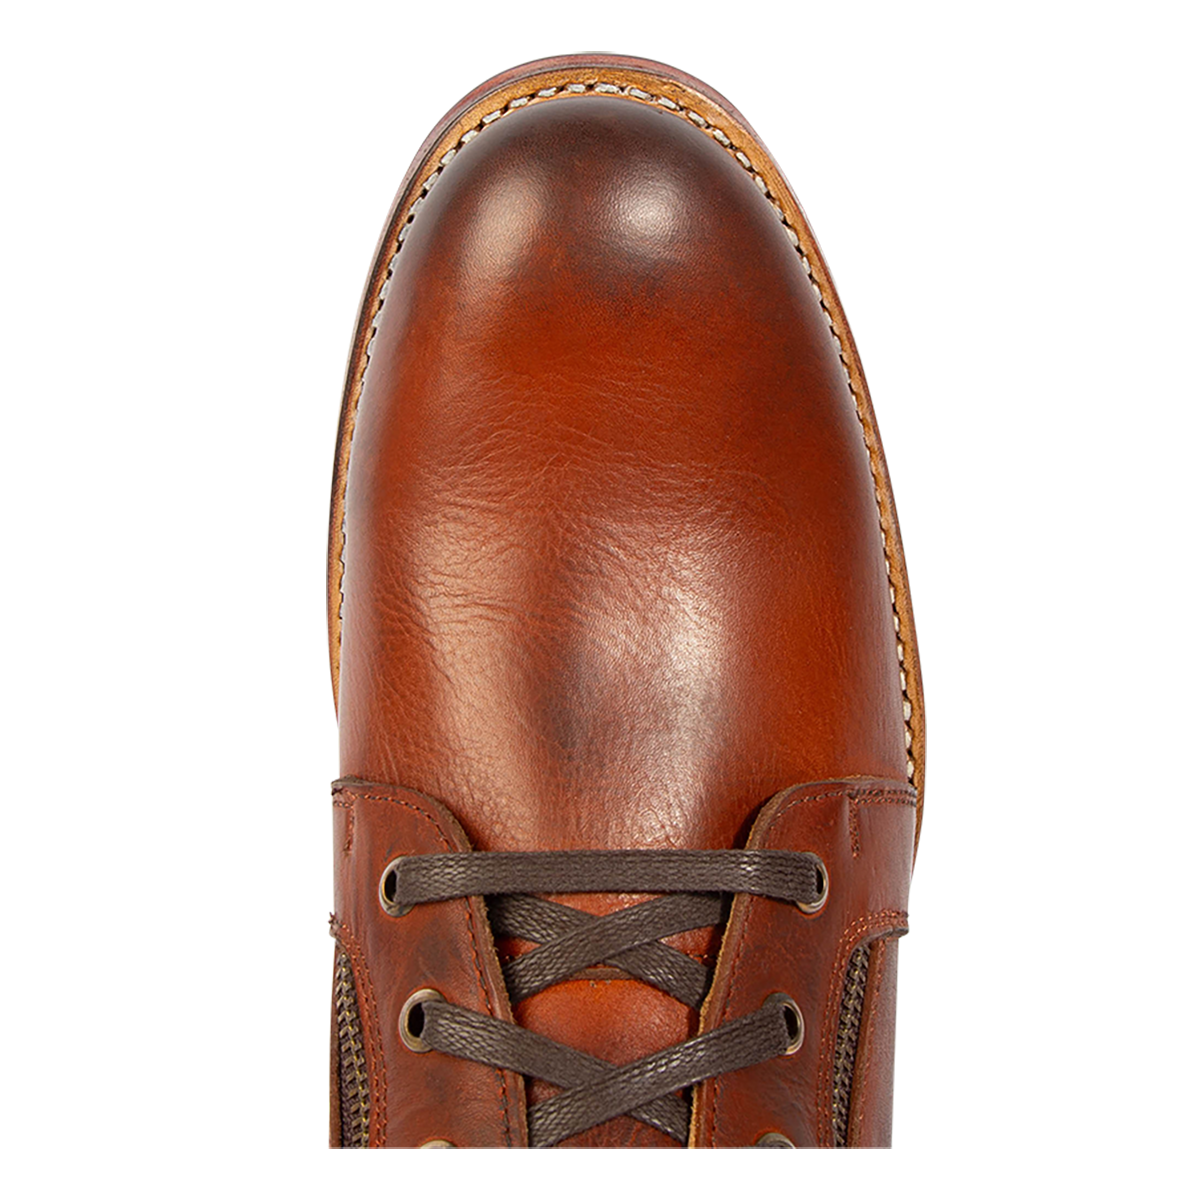 Top view showing rounded toe on FREEBIRD men's Chevy rust leather boot